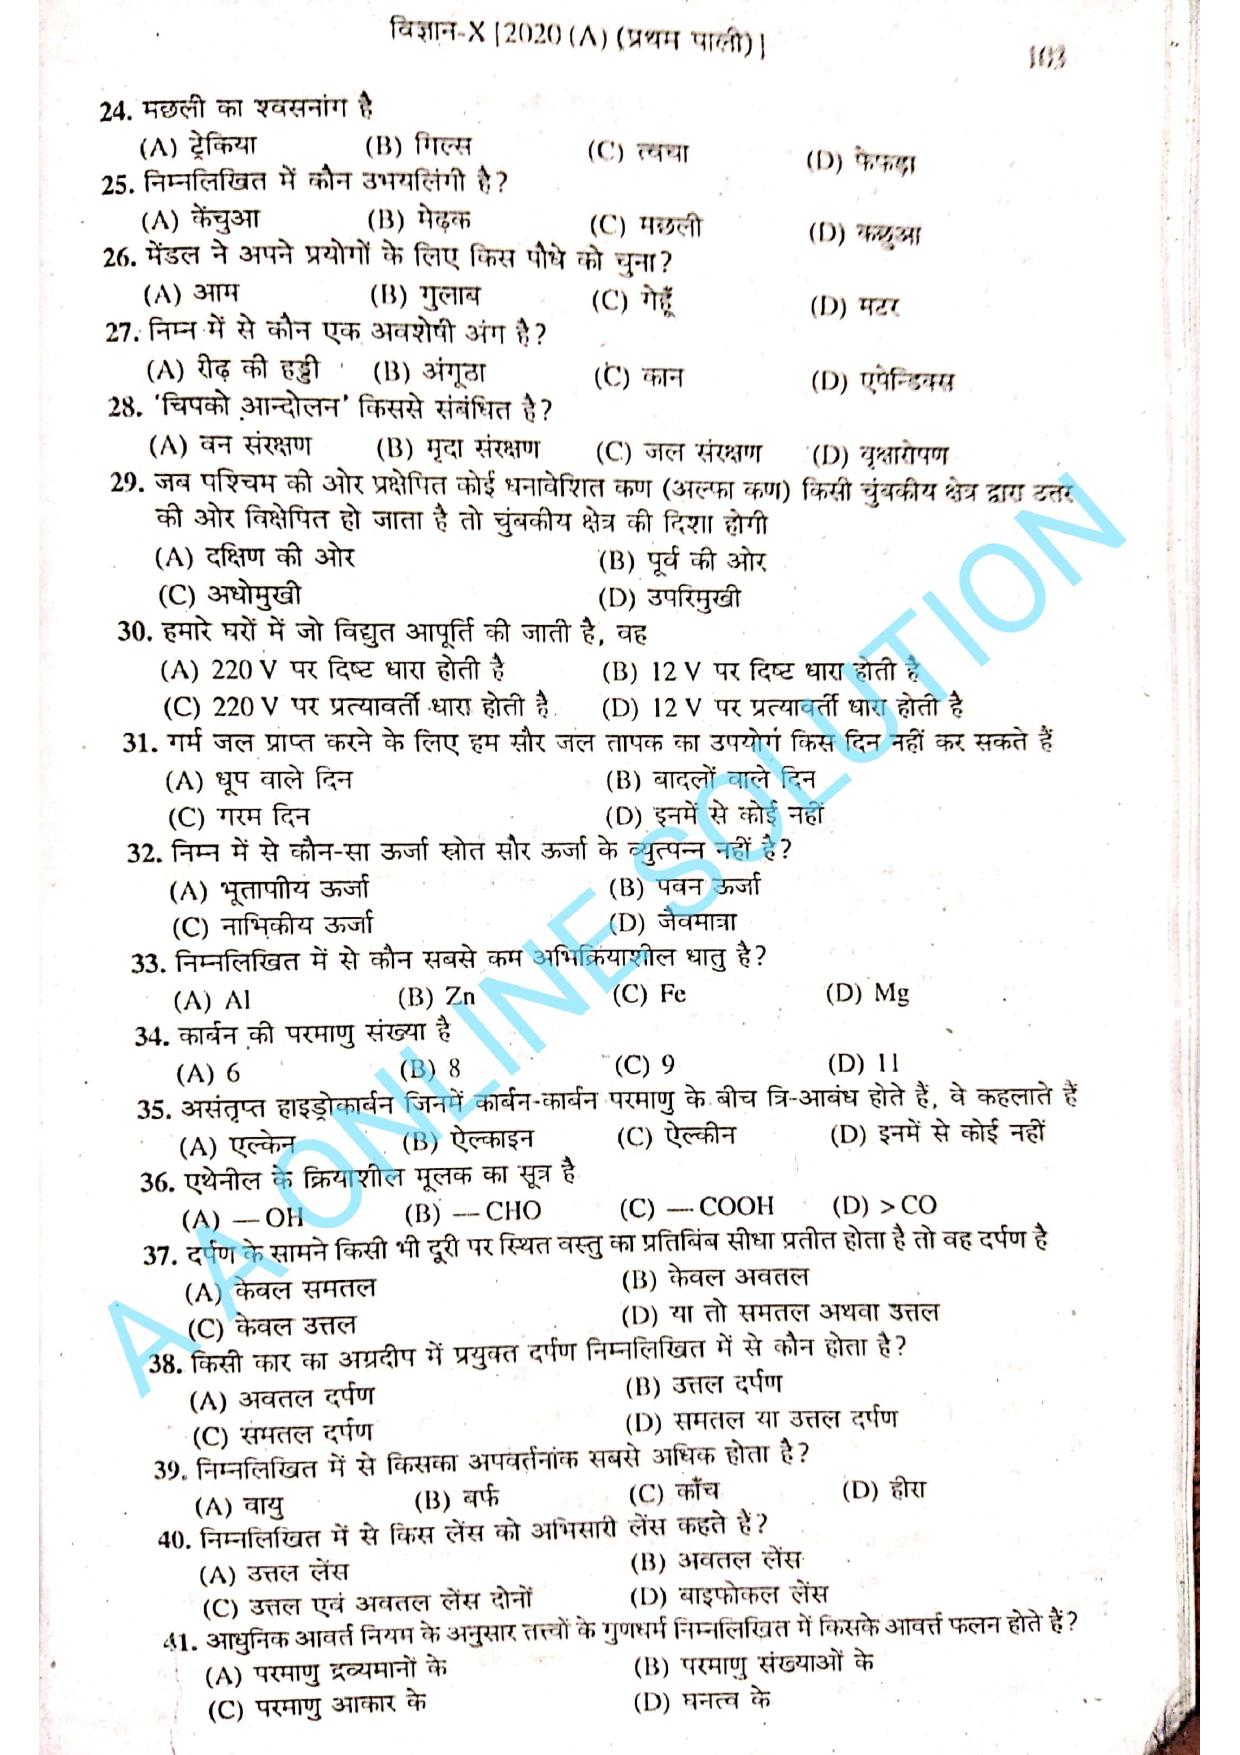 Bihar Board Class 10 Science 2020 (1st Sitting) Question Paper - Page 3